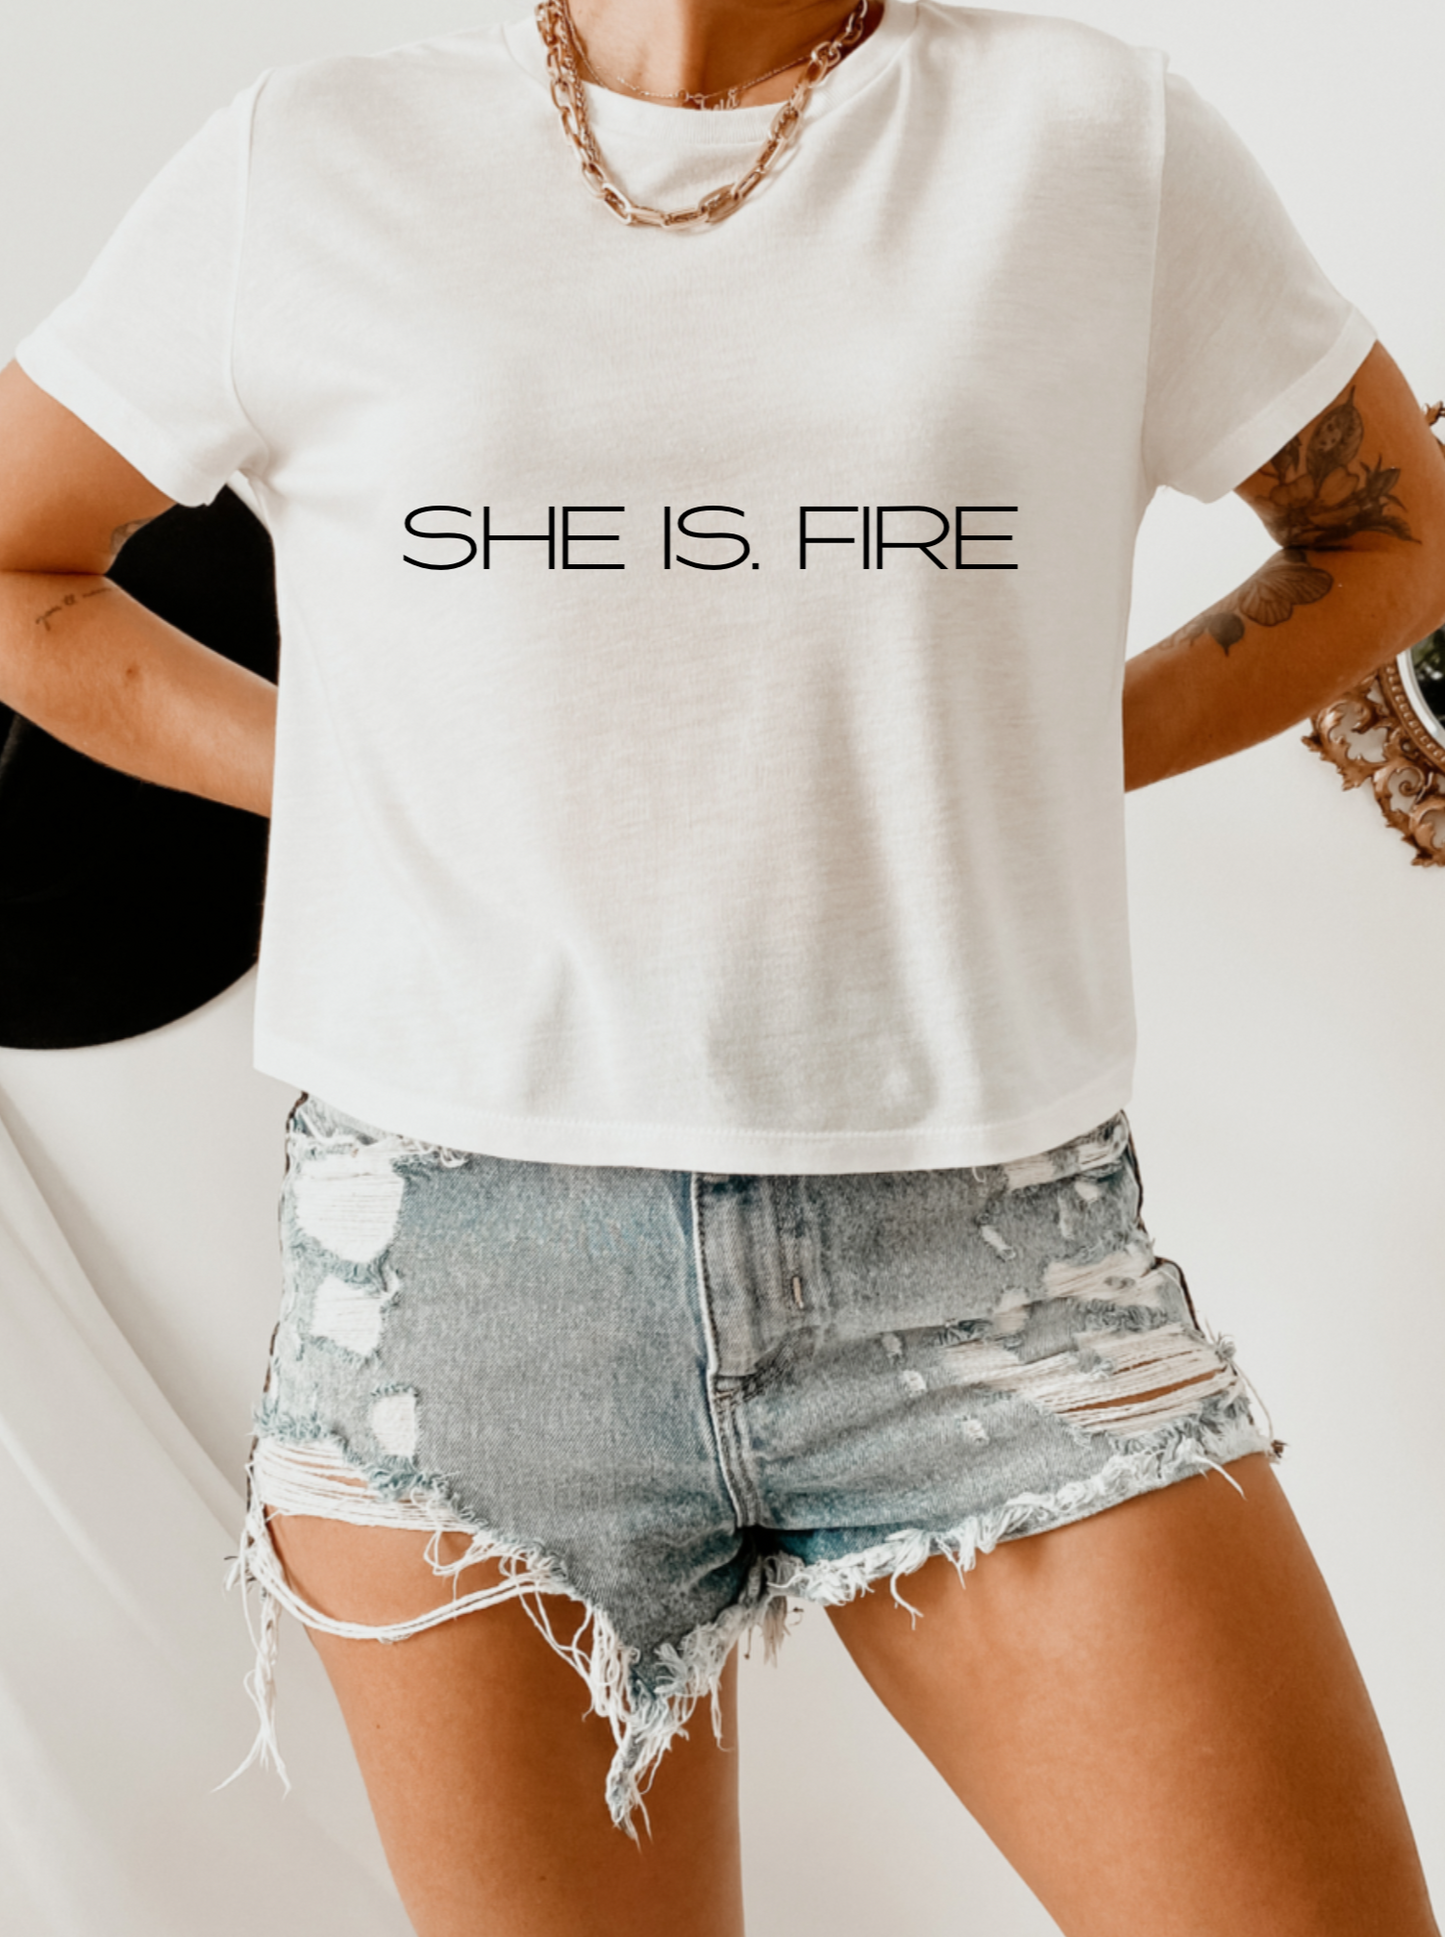 SHE IS. FIRE Cropped Tee